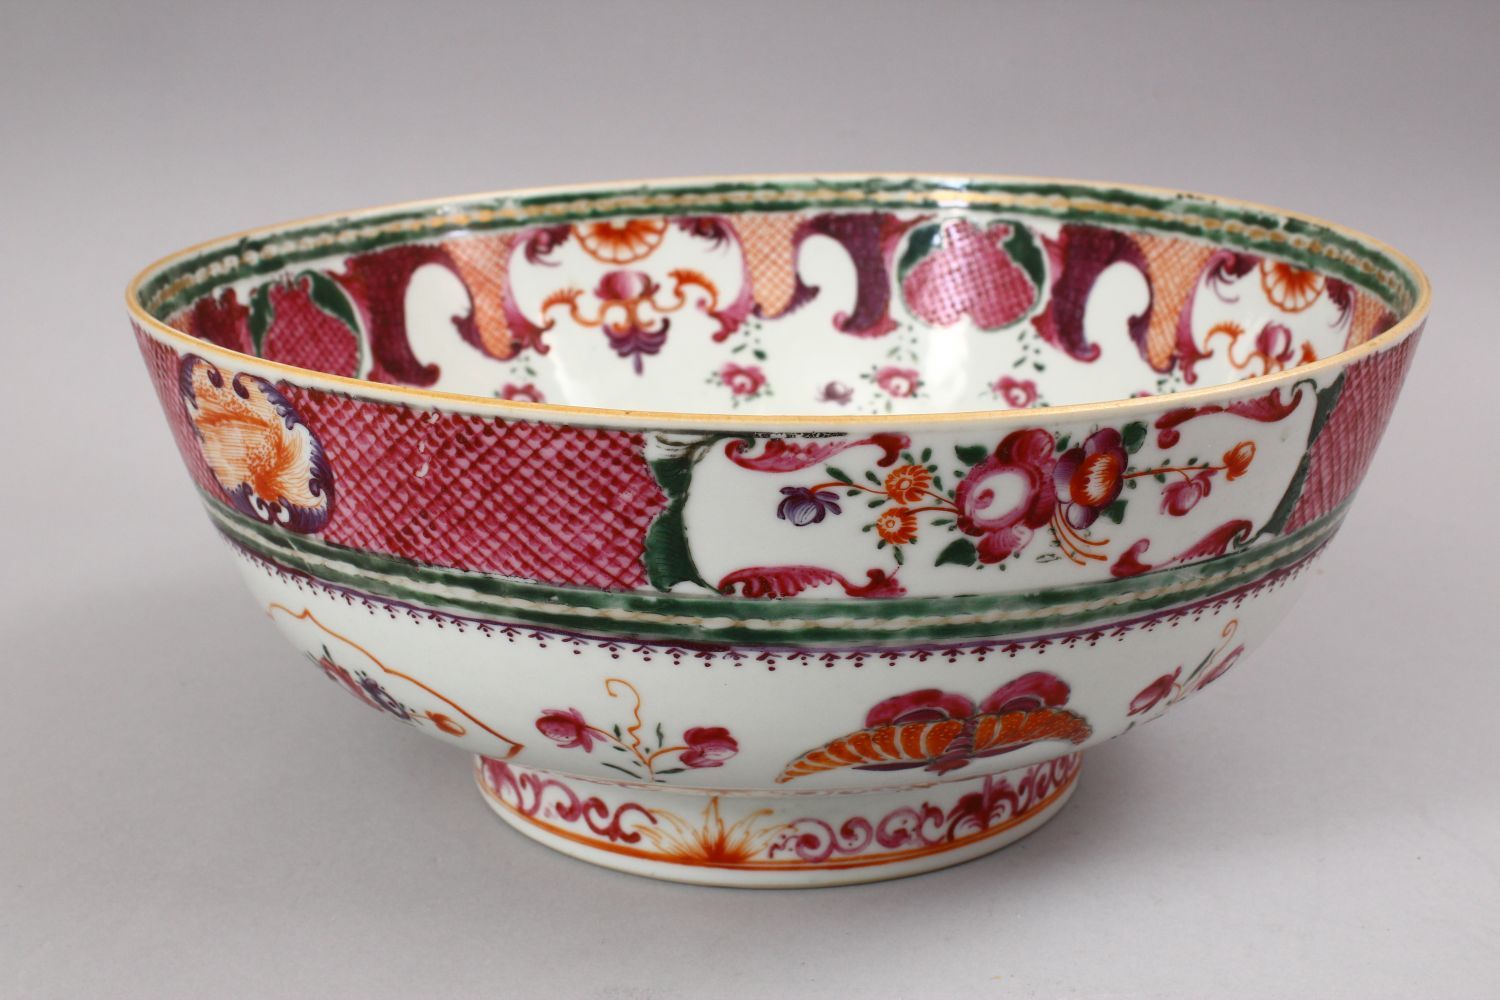 A GOOD 18TH CENTURY CHINESE QIANLONG MANDARIN PORCELAIN BOWL, decorated with scenes of flora and - Image 4 of 6